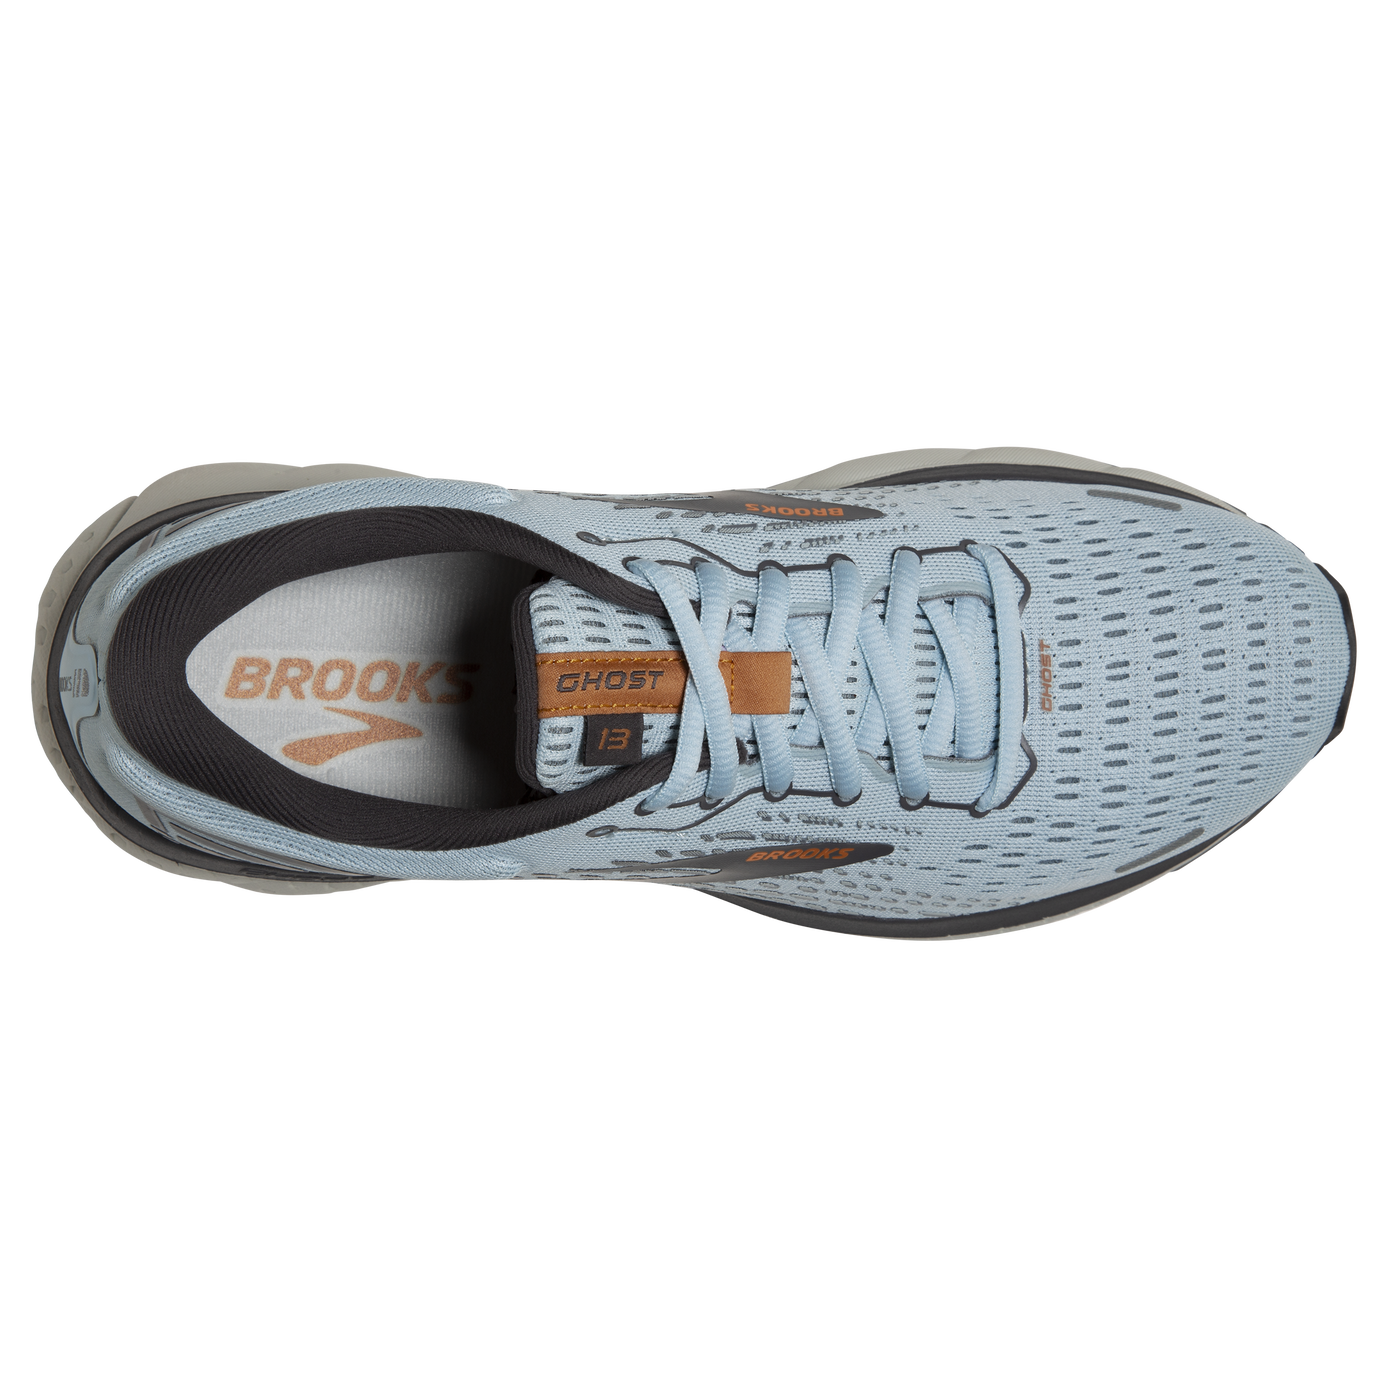 B 435 SAVE $$$ BROOKS GHOST 13 WOMENS RUNNING SHOES